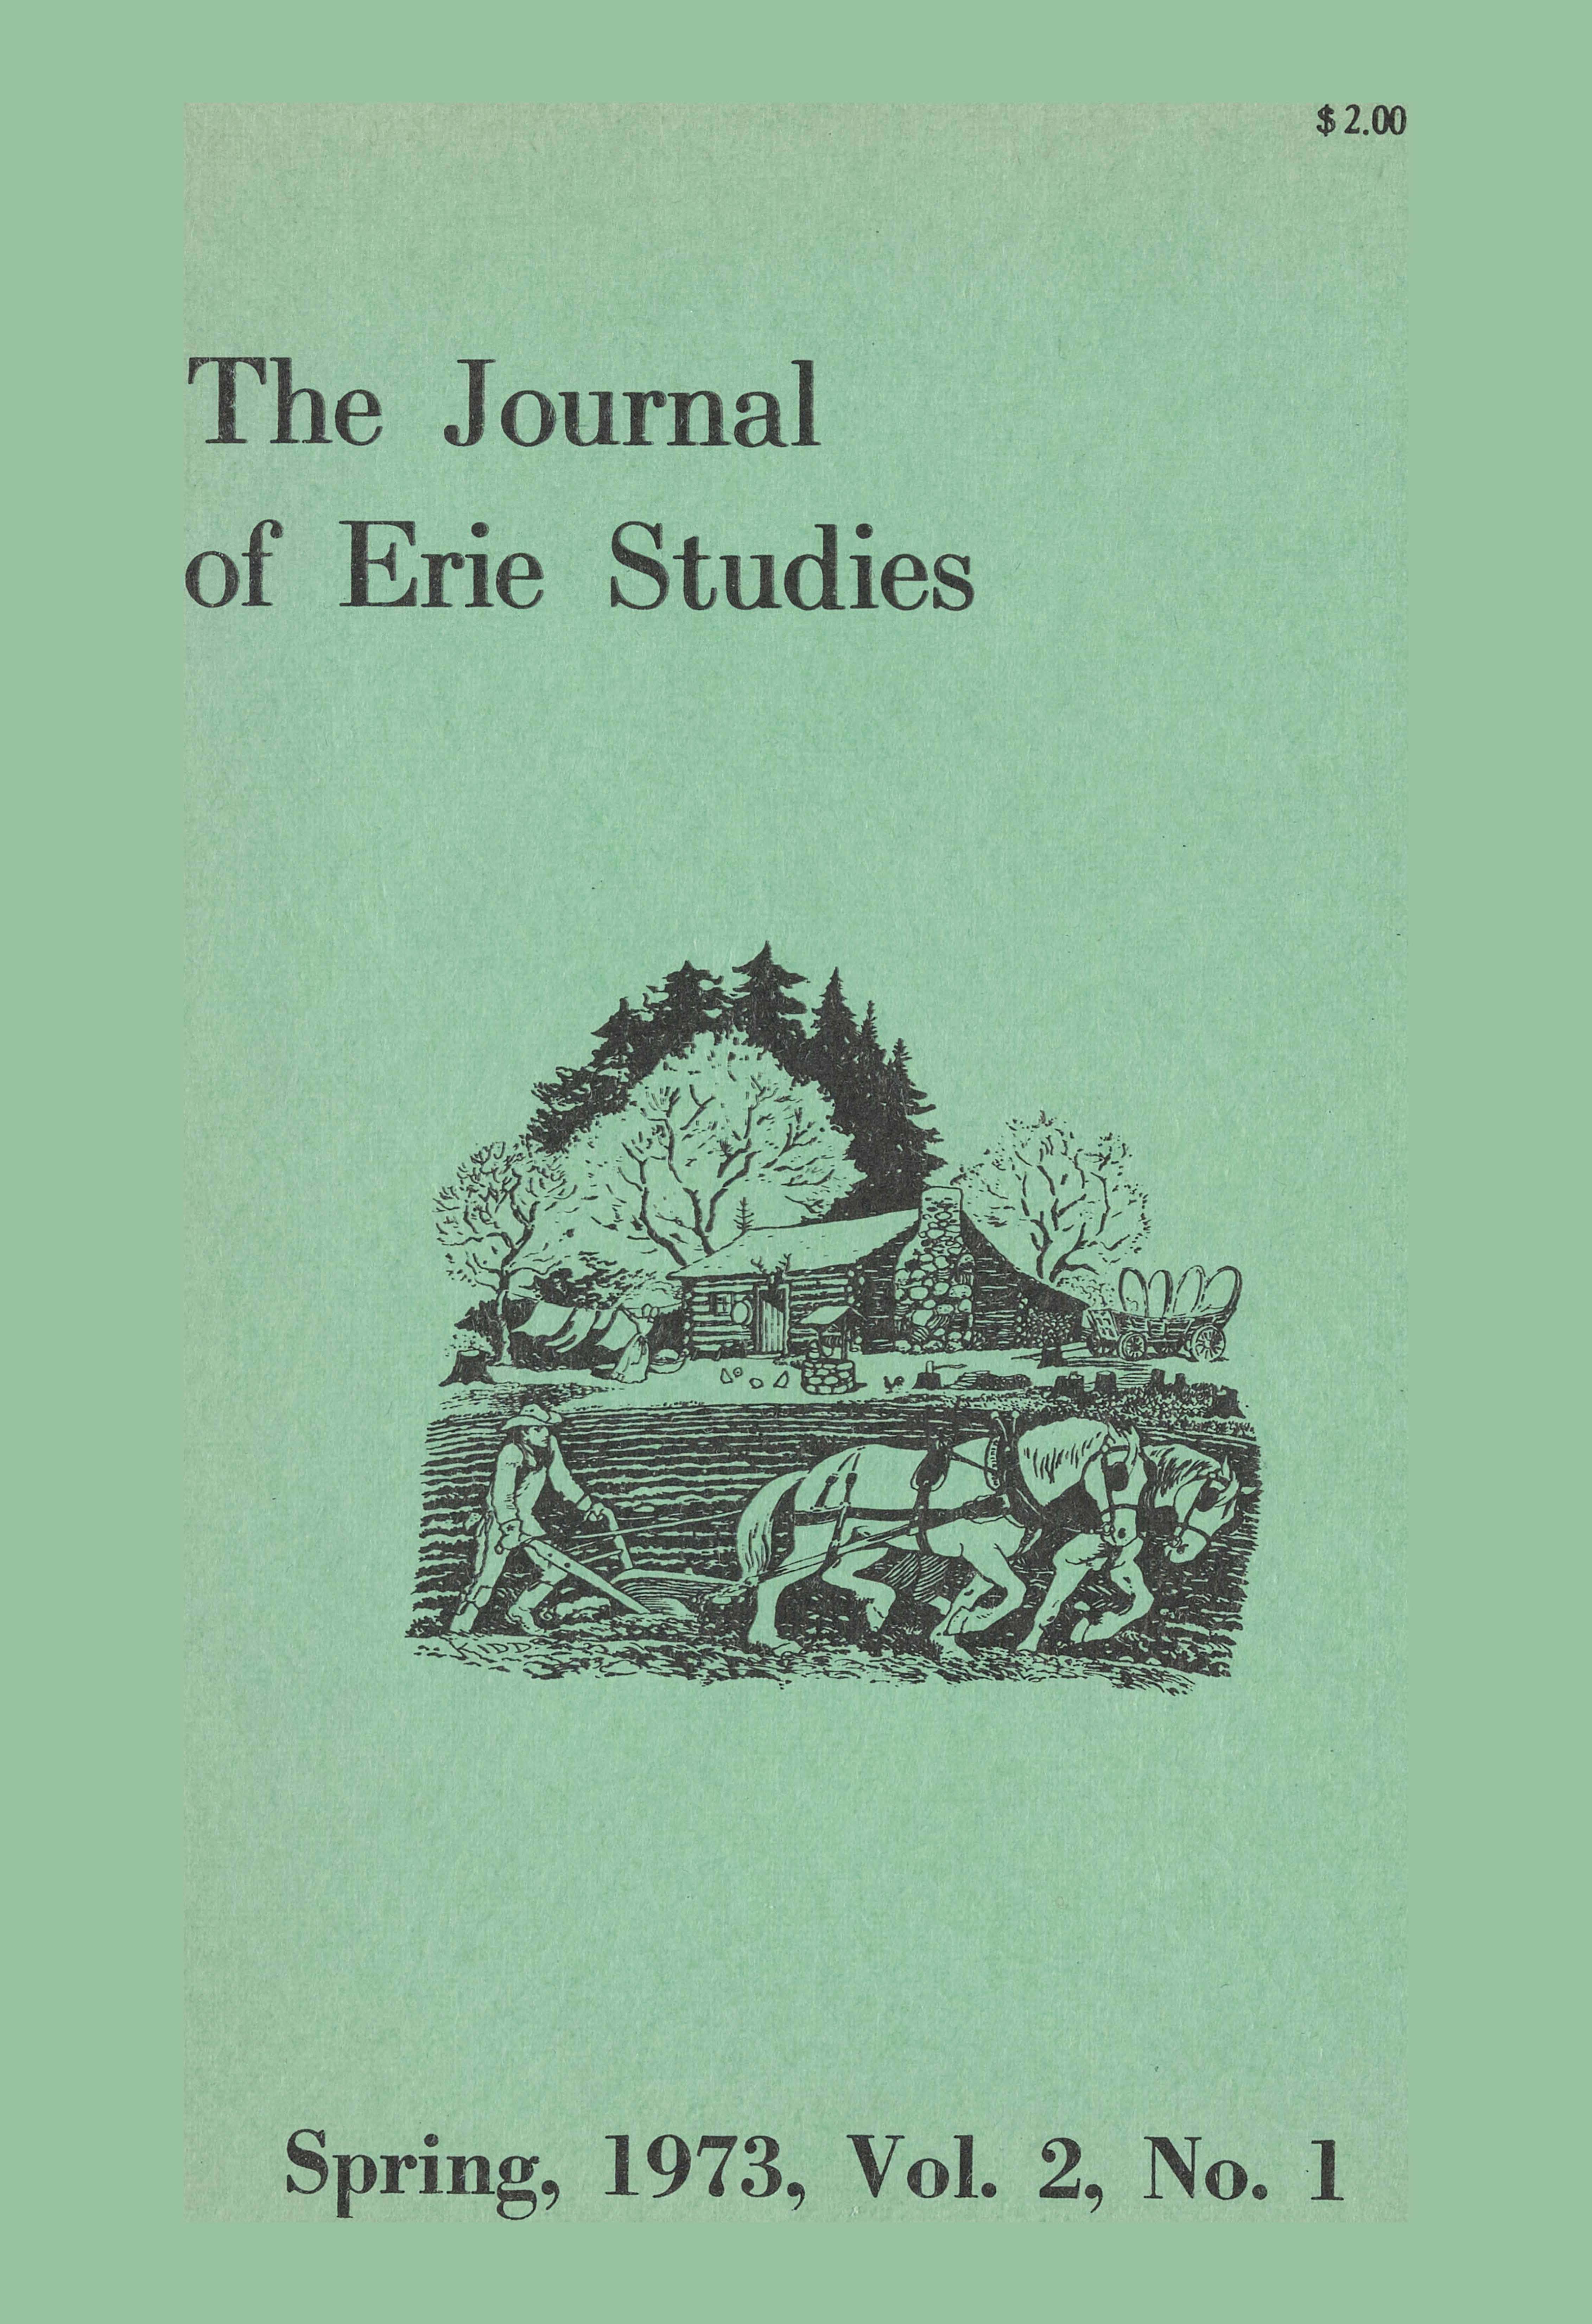 Sketch of two horses and a person working in a field wih the text, "The Journal of Erie Studies, Spring, 1973, Vol. 2, No. 1."